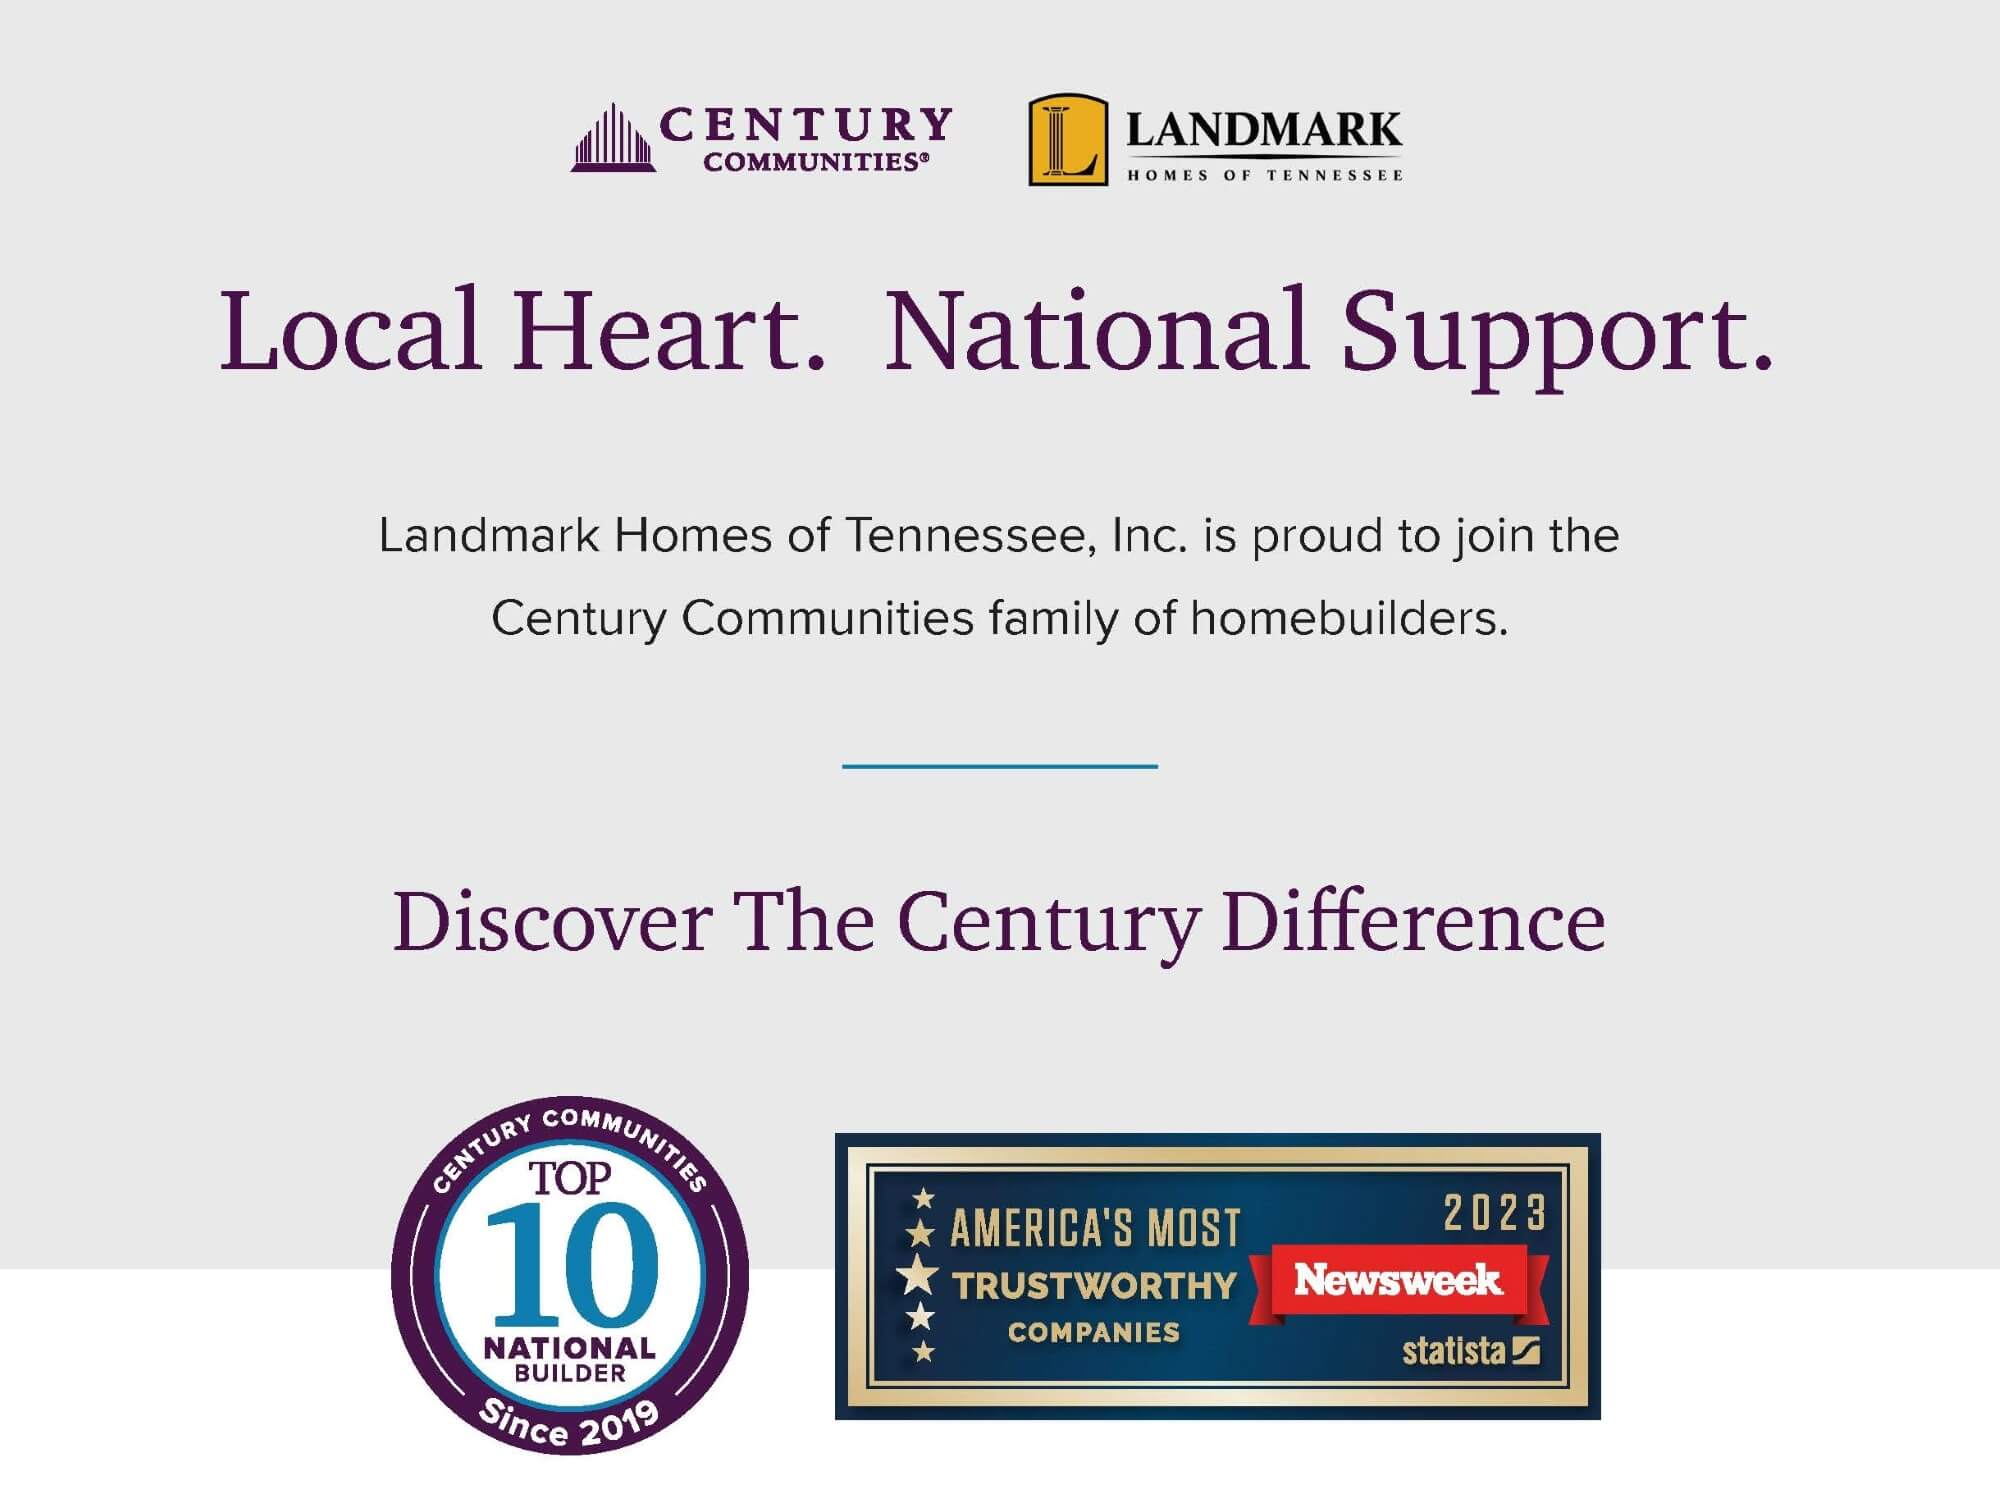 Local Heart. National Support. Landmark Homes of Tennessee, Inc is proud to join the Century Communities family of homebuilders. Discover the Century Difference.